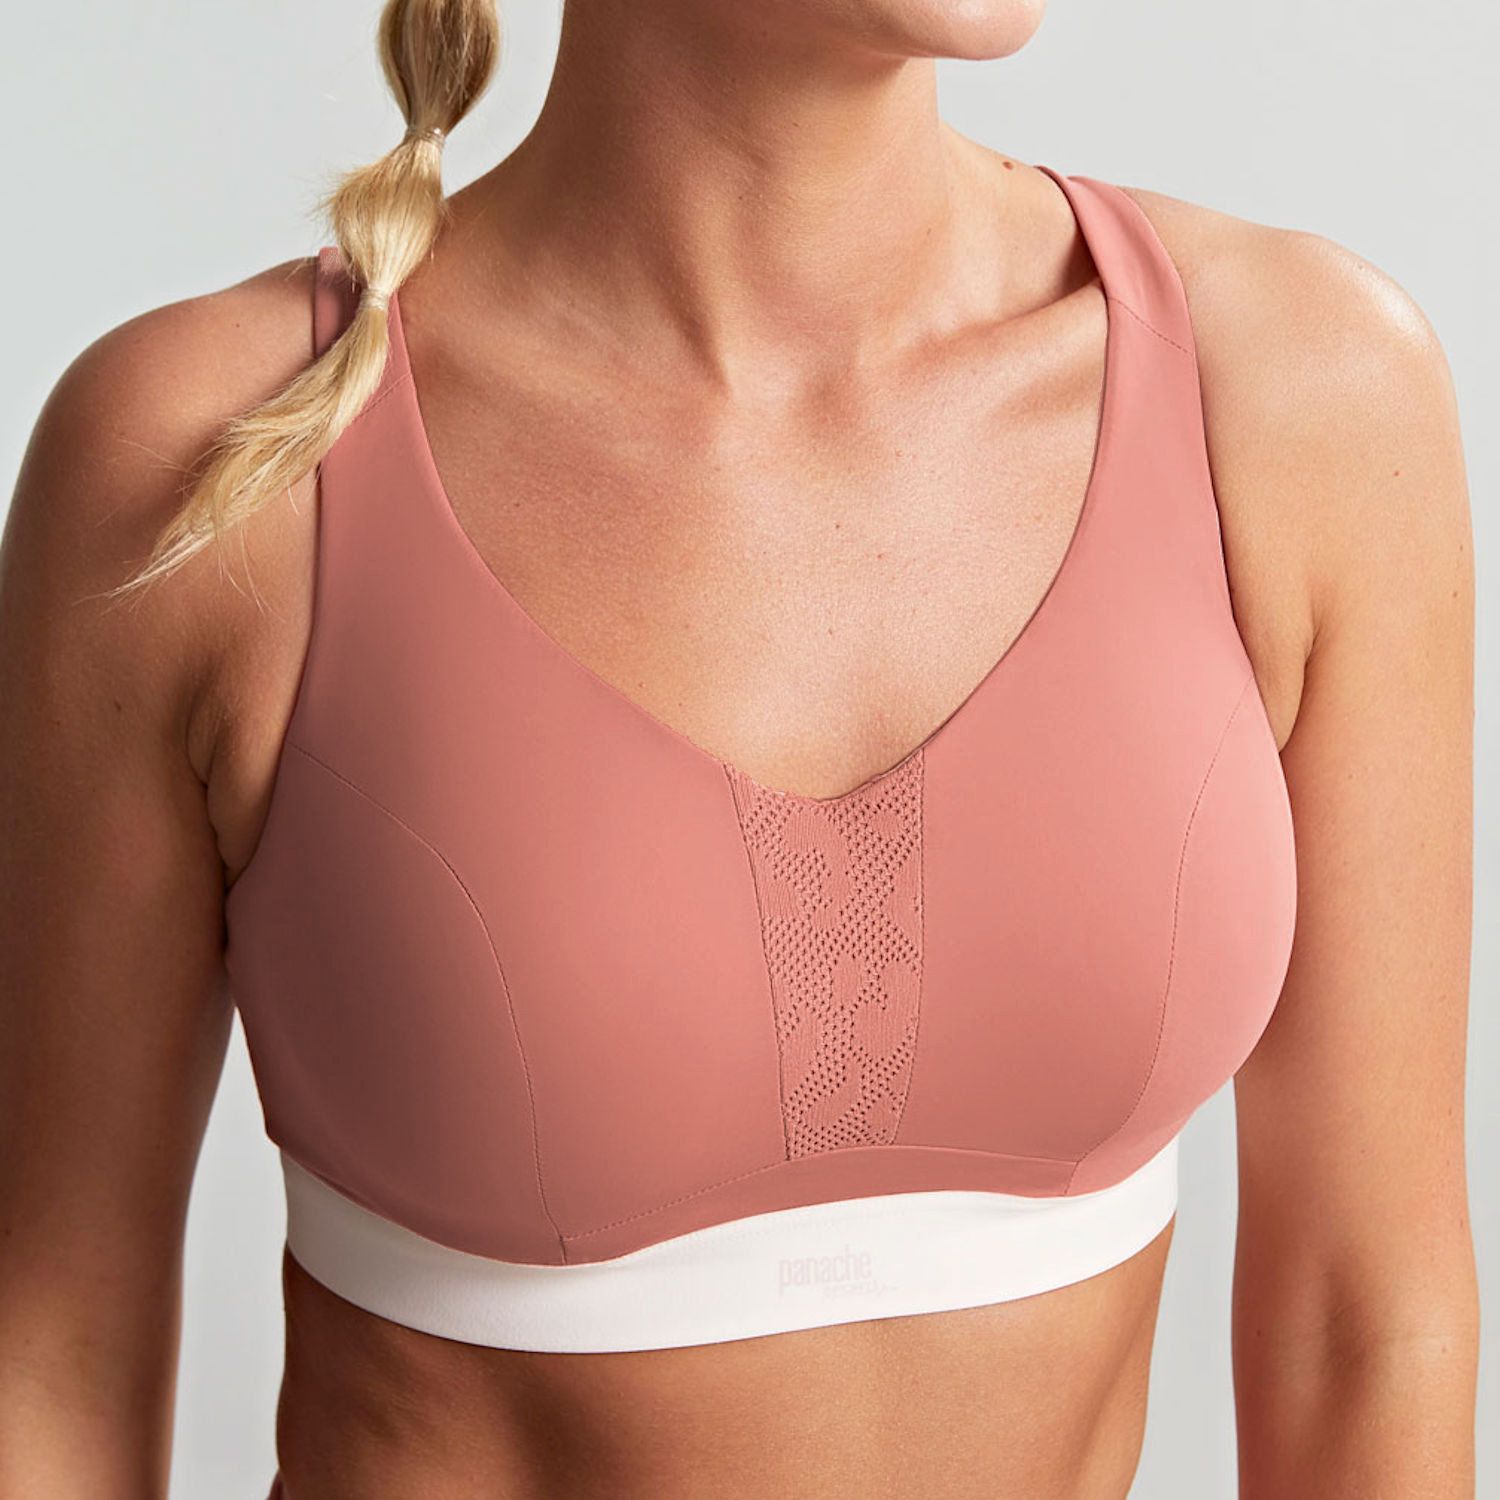 Big & Little Cup Review: Panache Underwired Sports Bra - Big Cup Little Cup